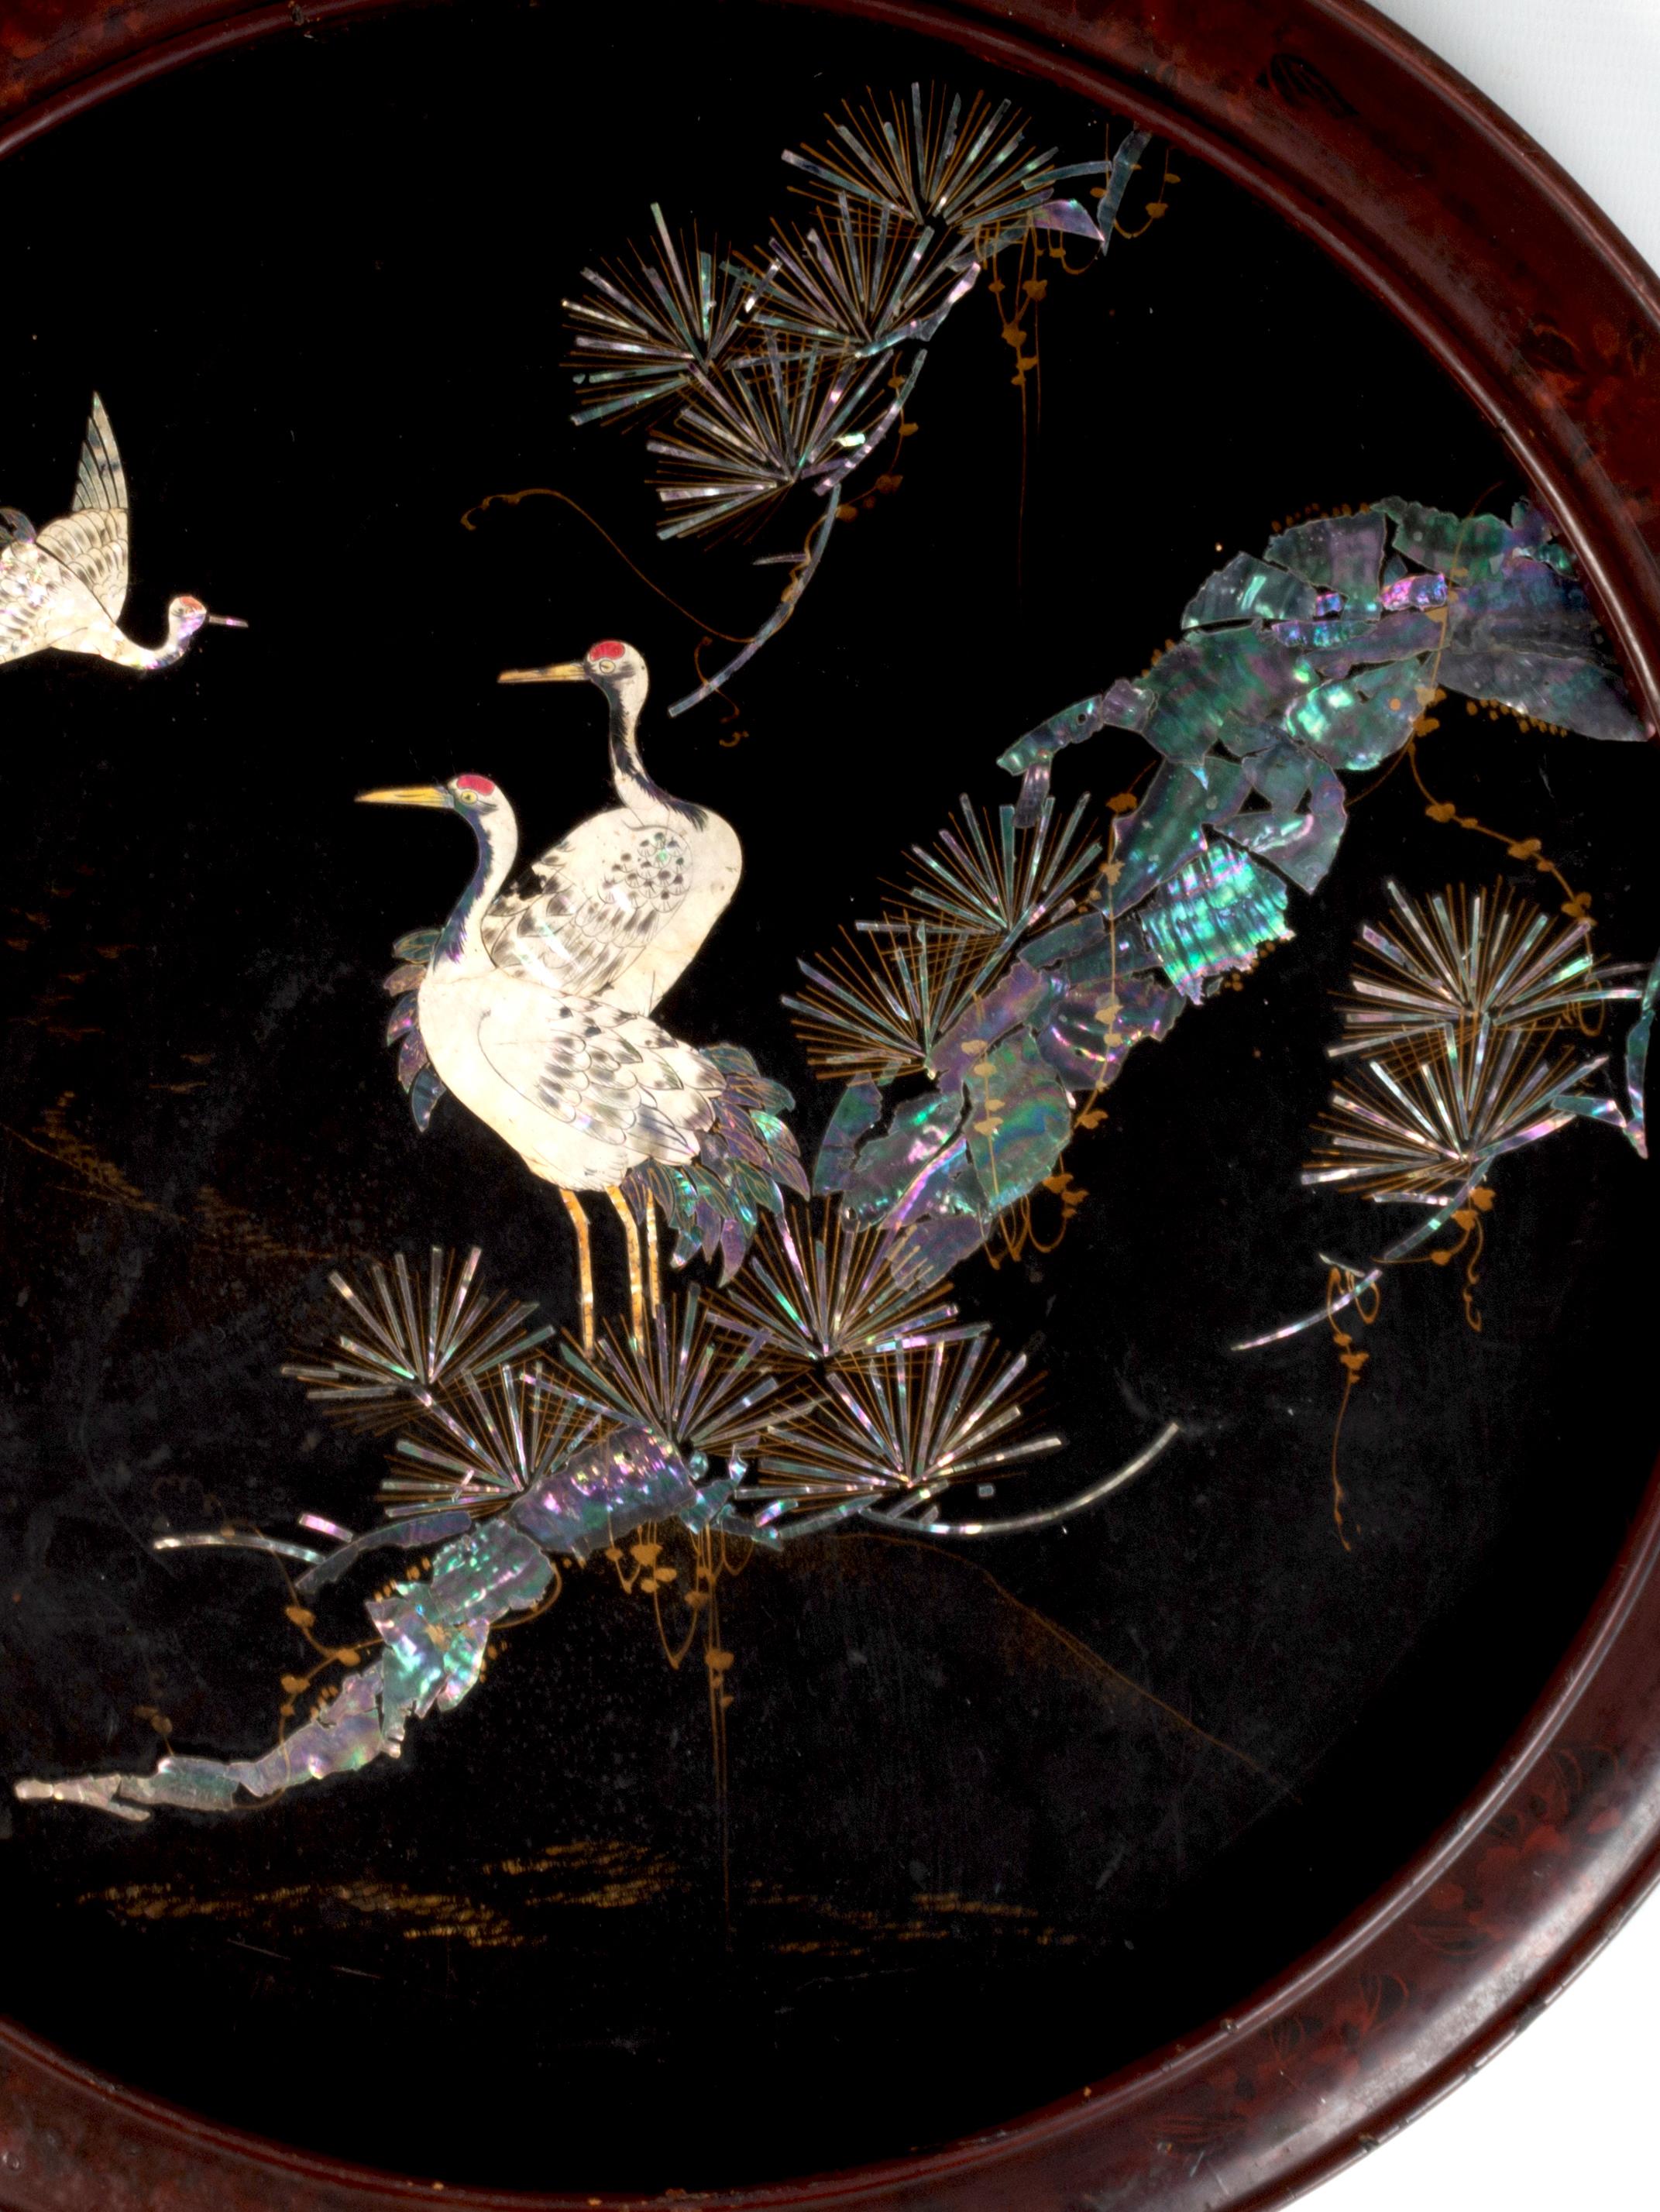 19th Century Shibayama Lacquered Inlay Charger, Meiji Period, Japan

A decorative 19th Century Japanese charger beautifully depicting herons and pine trees detailed in mother of pearl and bone on a lacquered ground. Presented in the original red